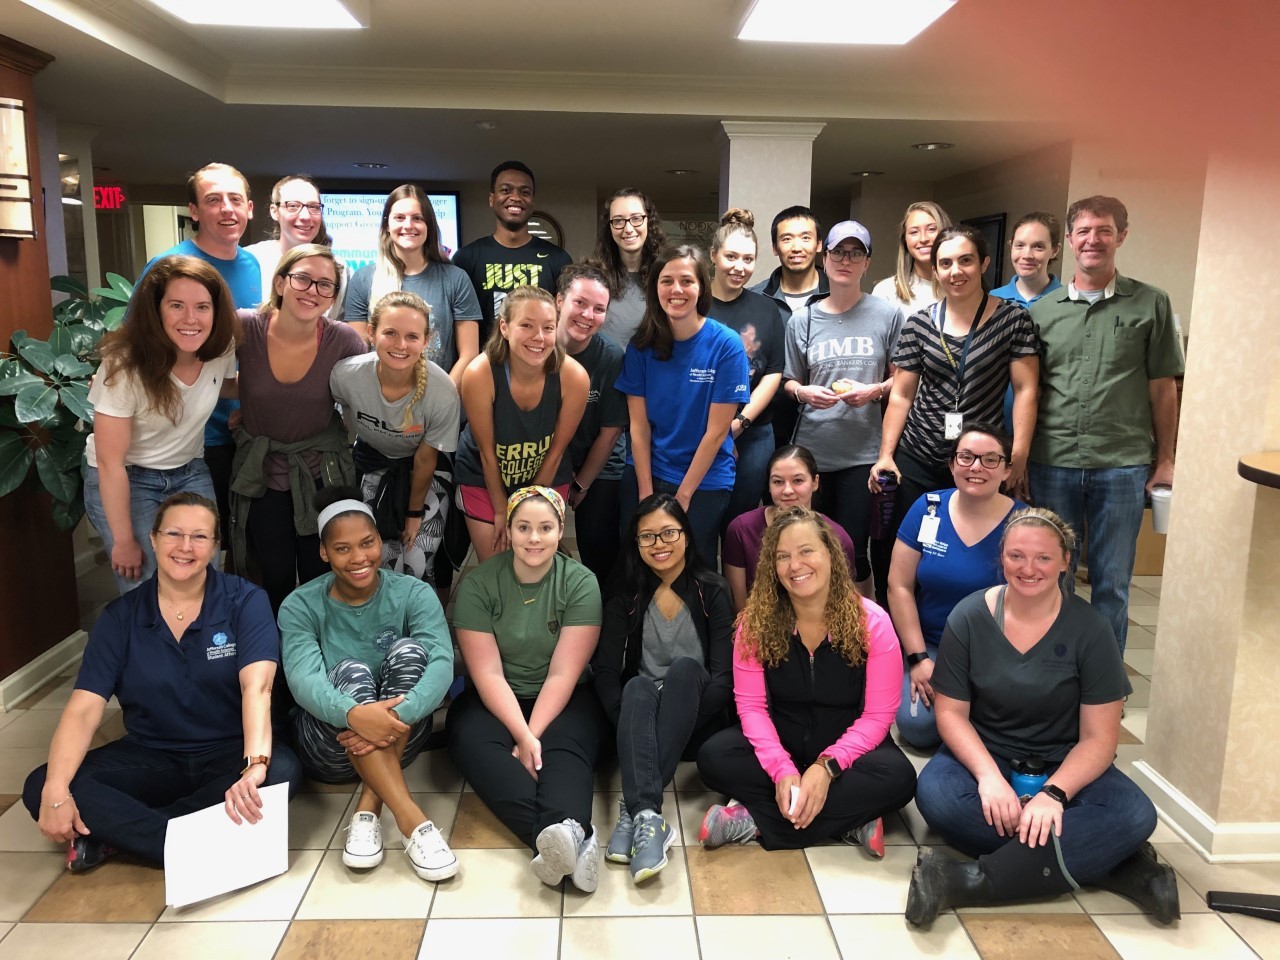 Physician Assistant students support homelessness survey efforts in Roanoke